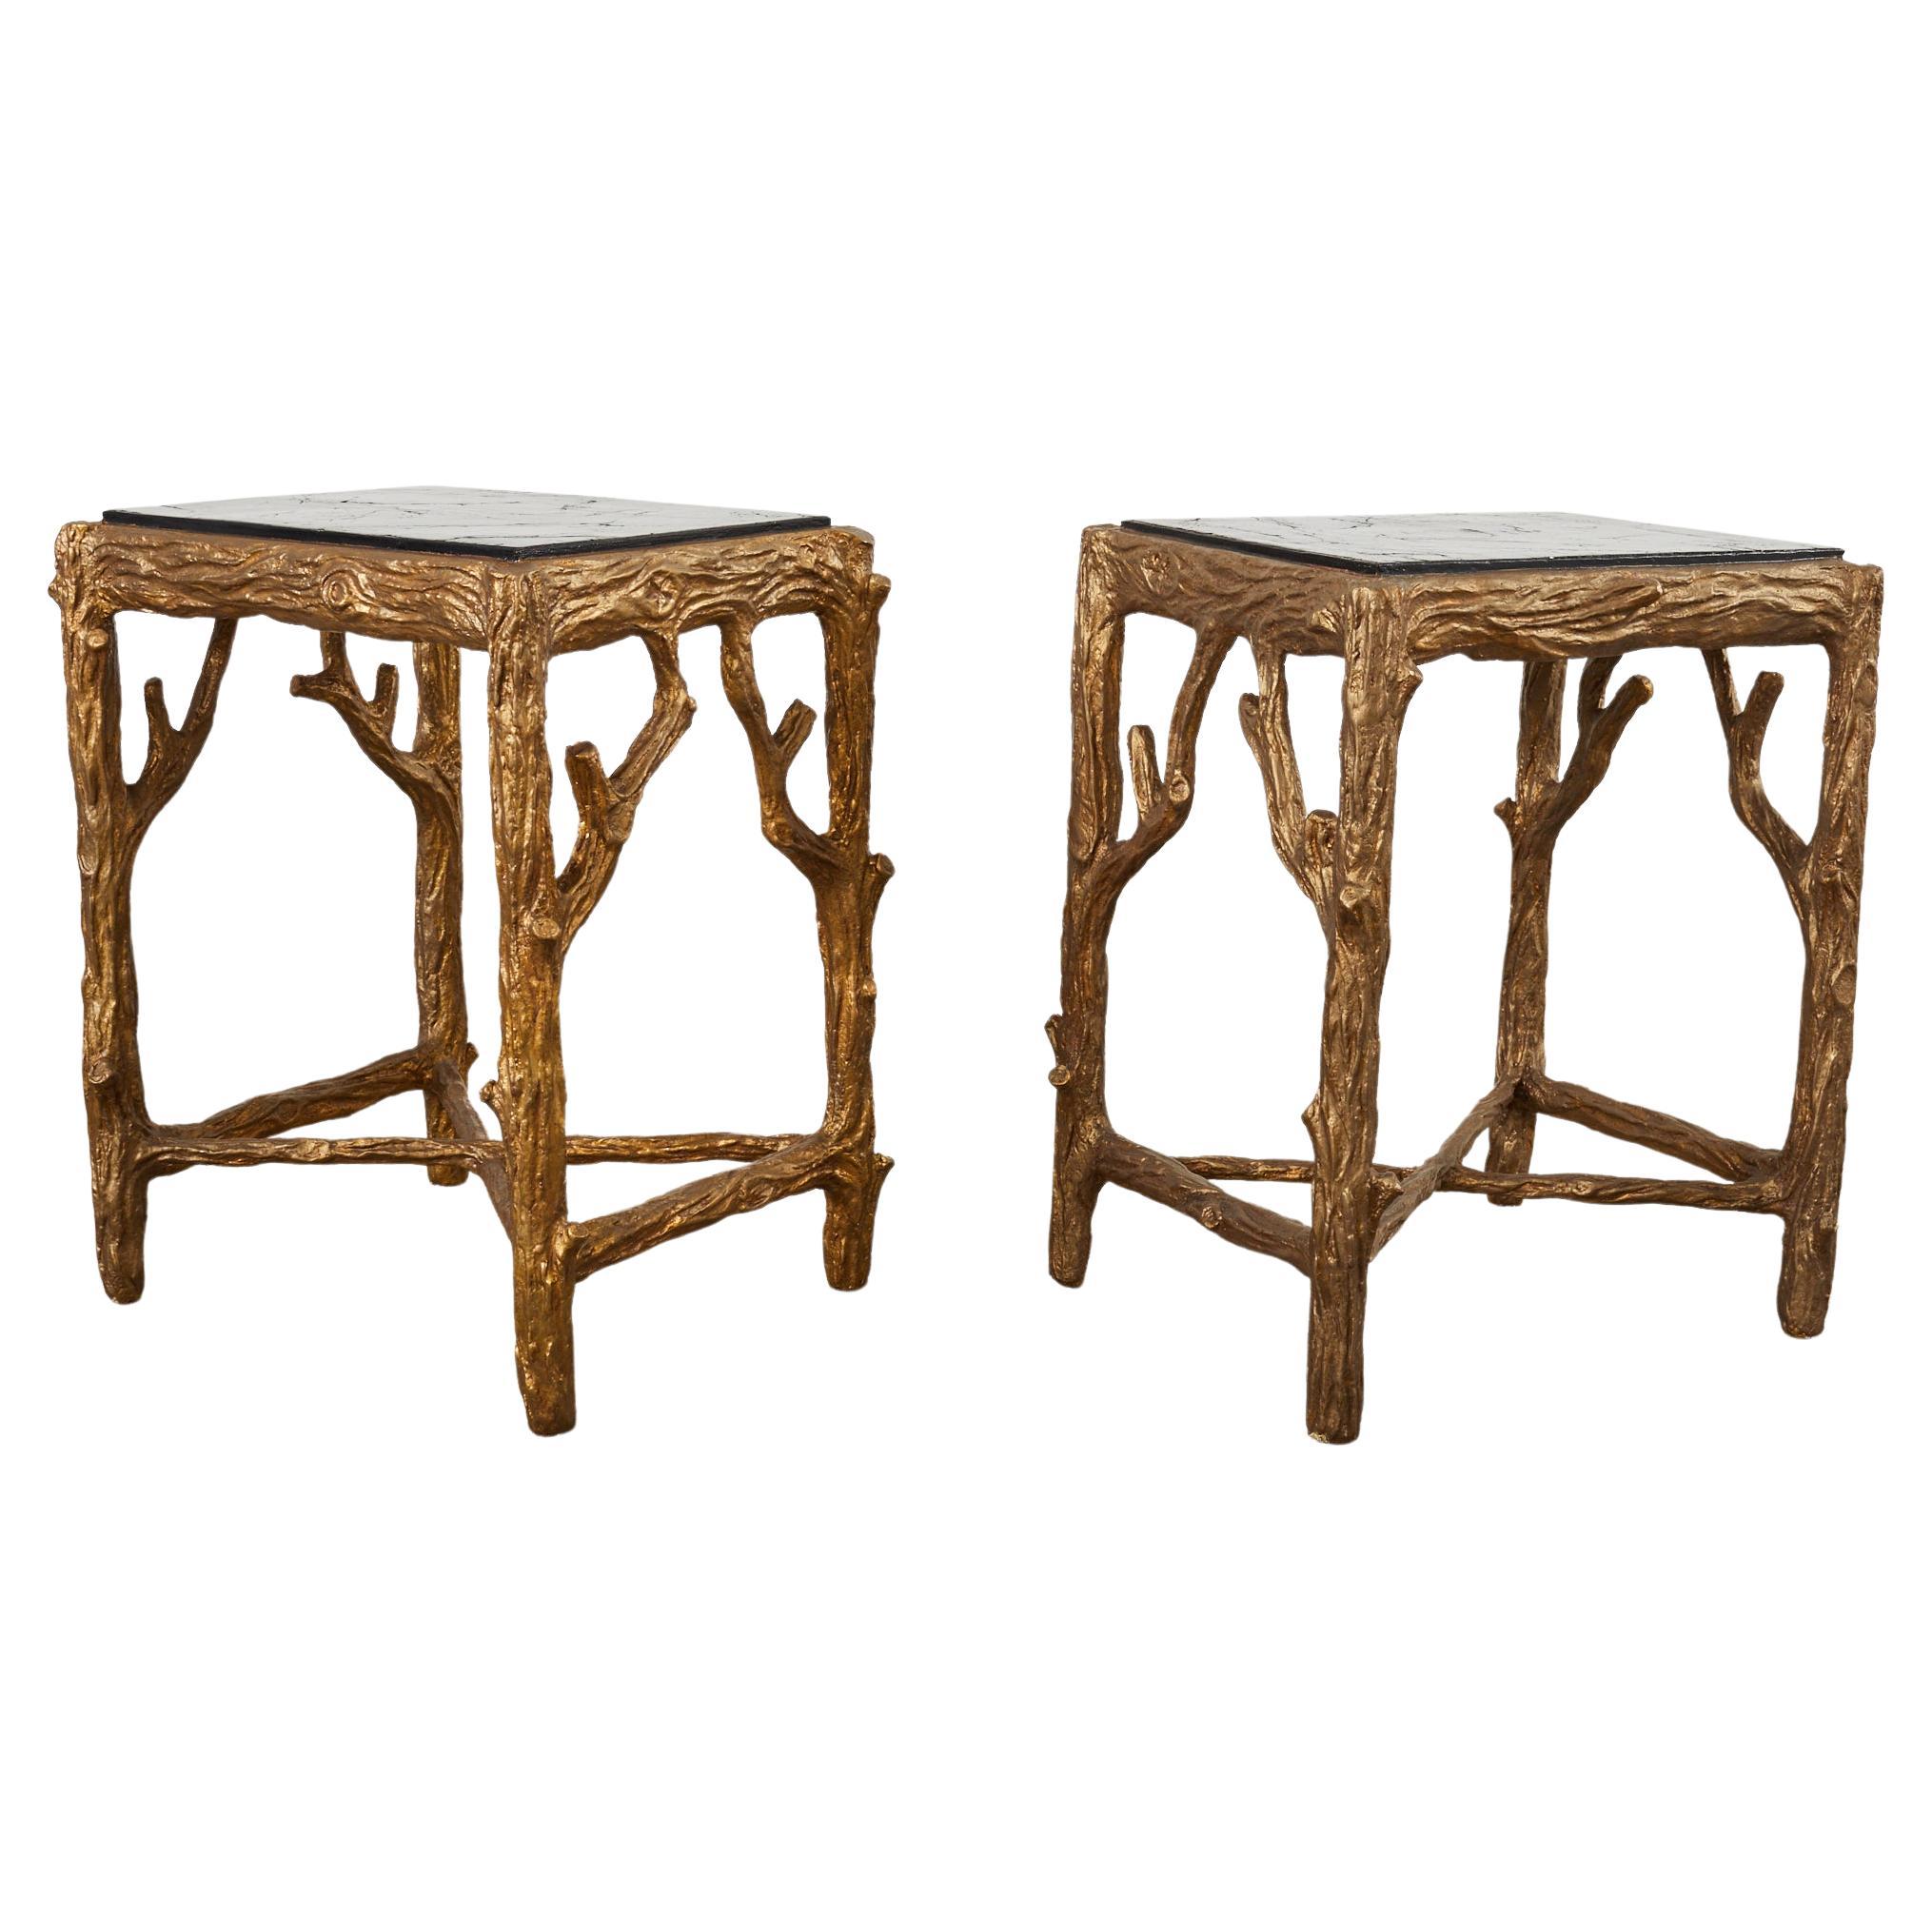 Pair of Gilt Faux Bois Drink Tables with Faux Marble Tops For Sale